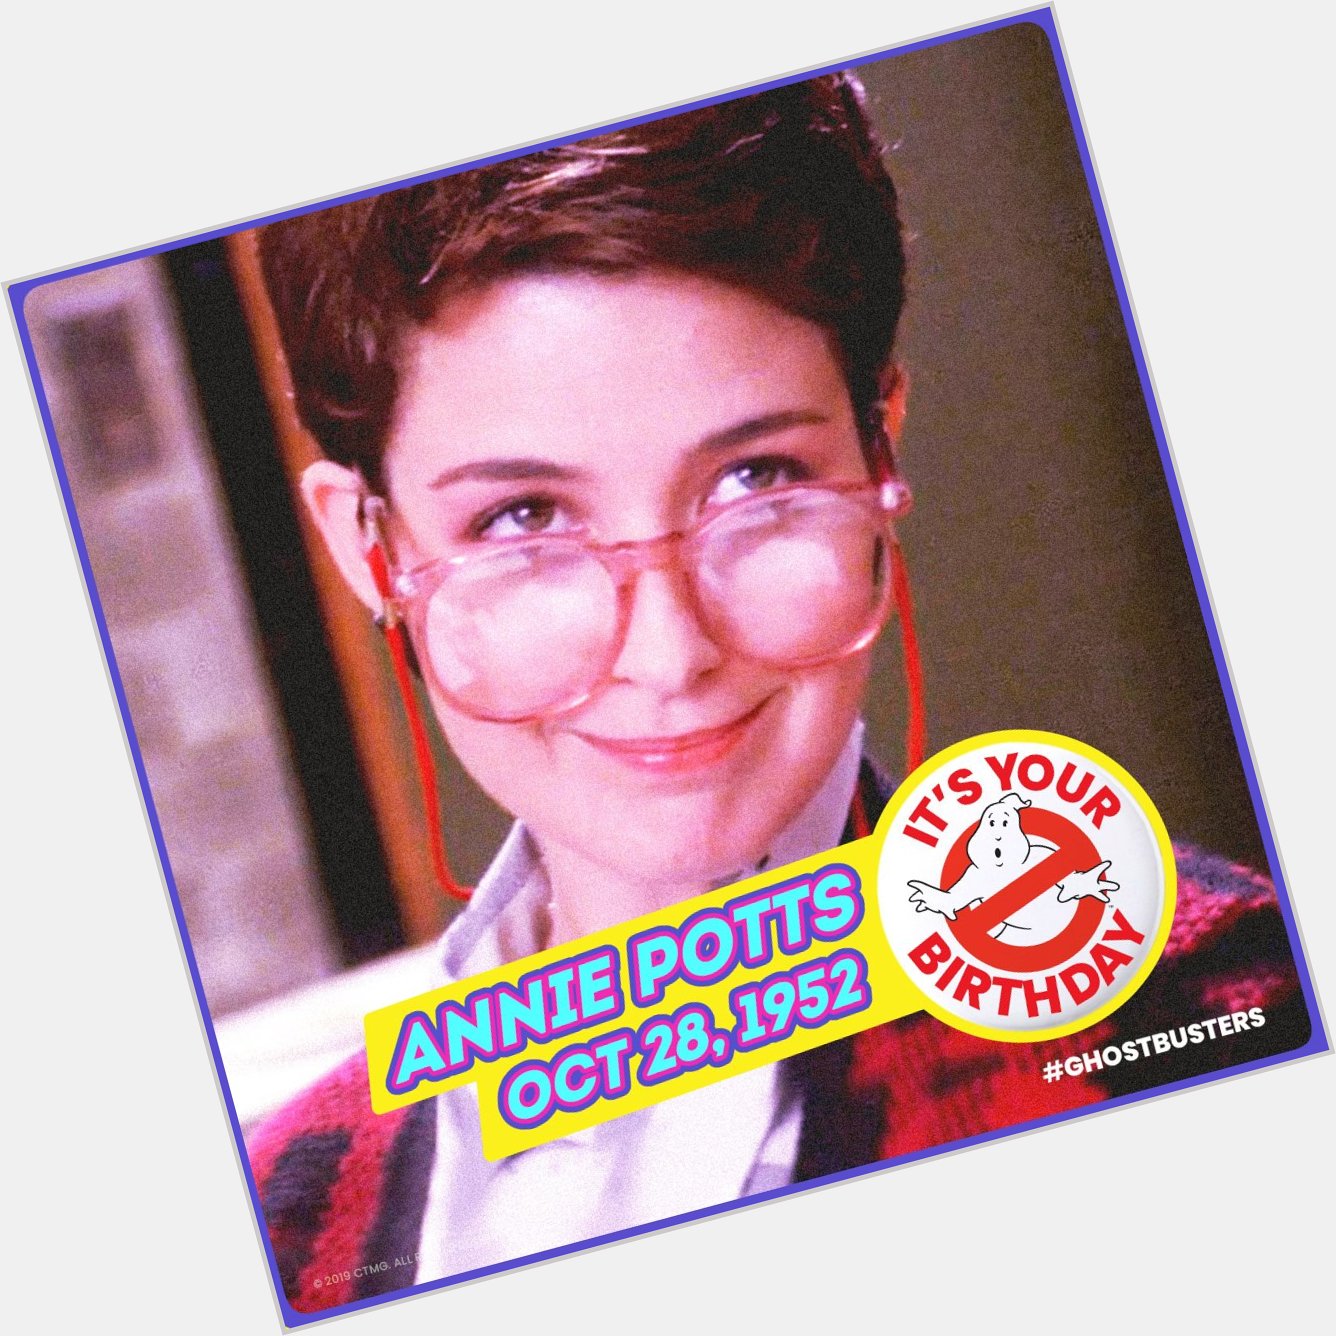 Happy birthday, Annie Potts! And again, sorry about the bug eyes thing. 